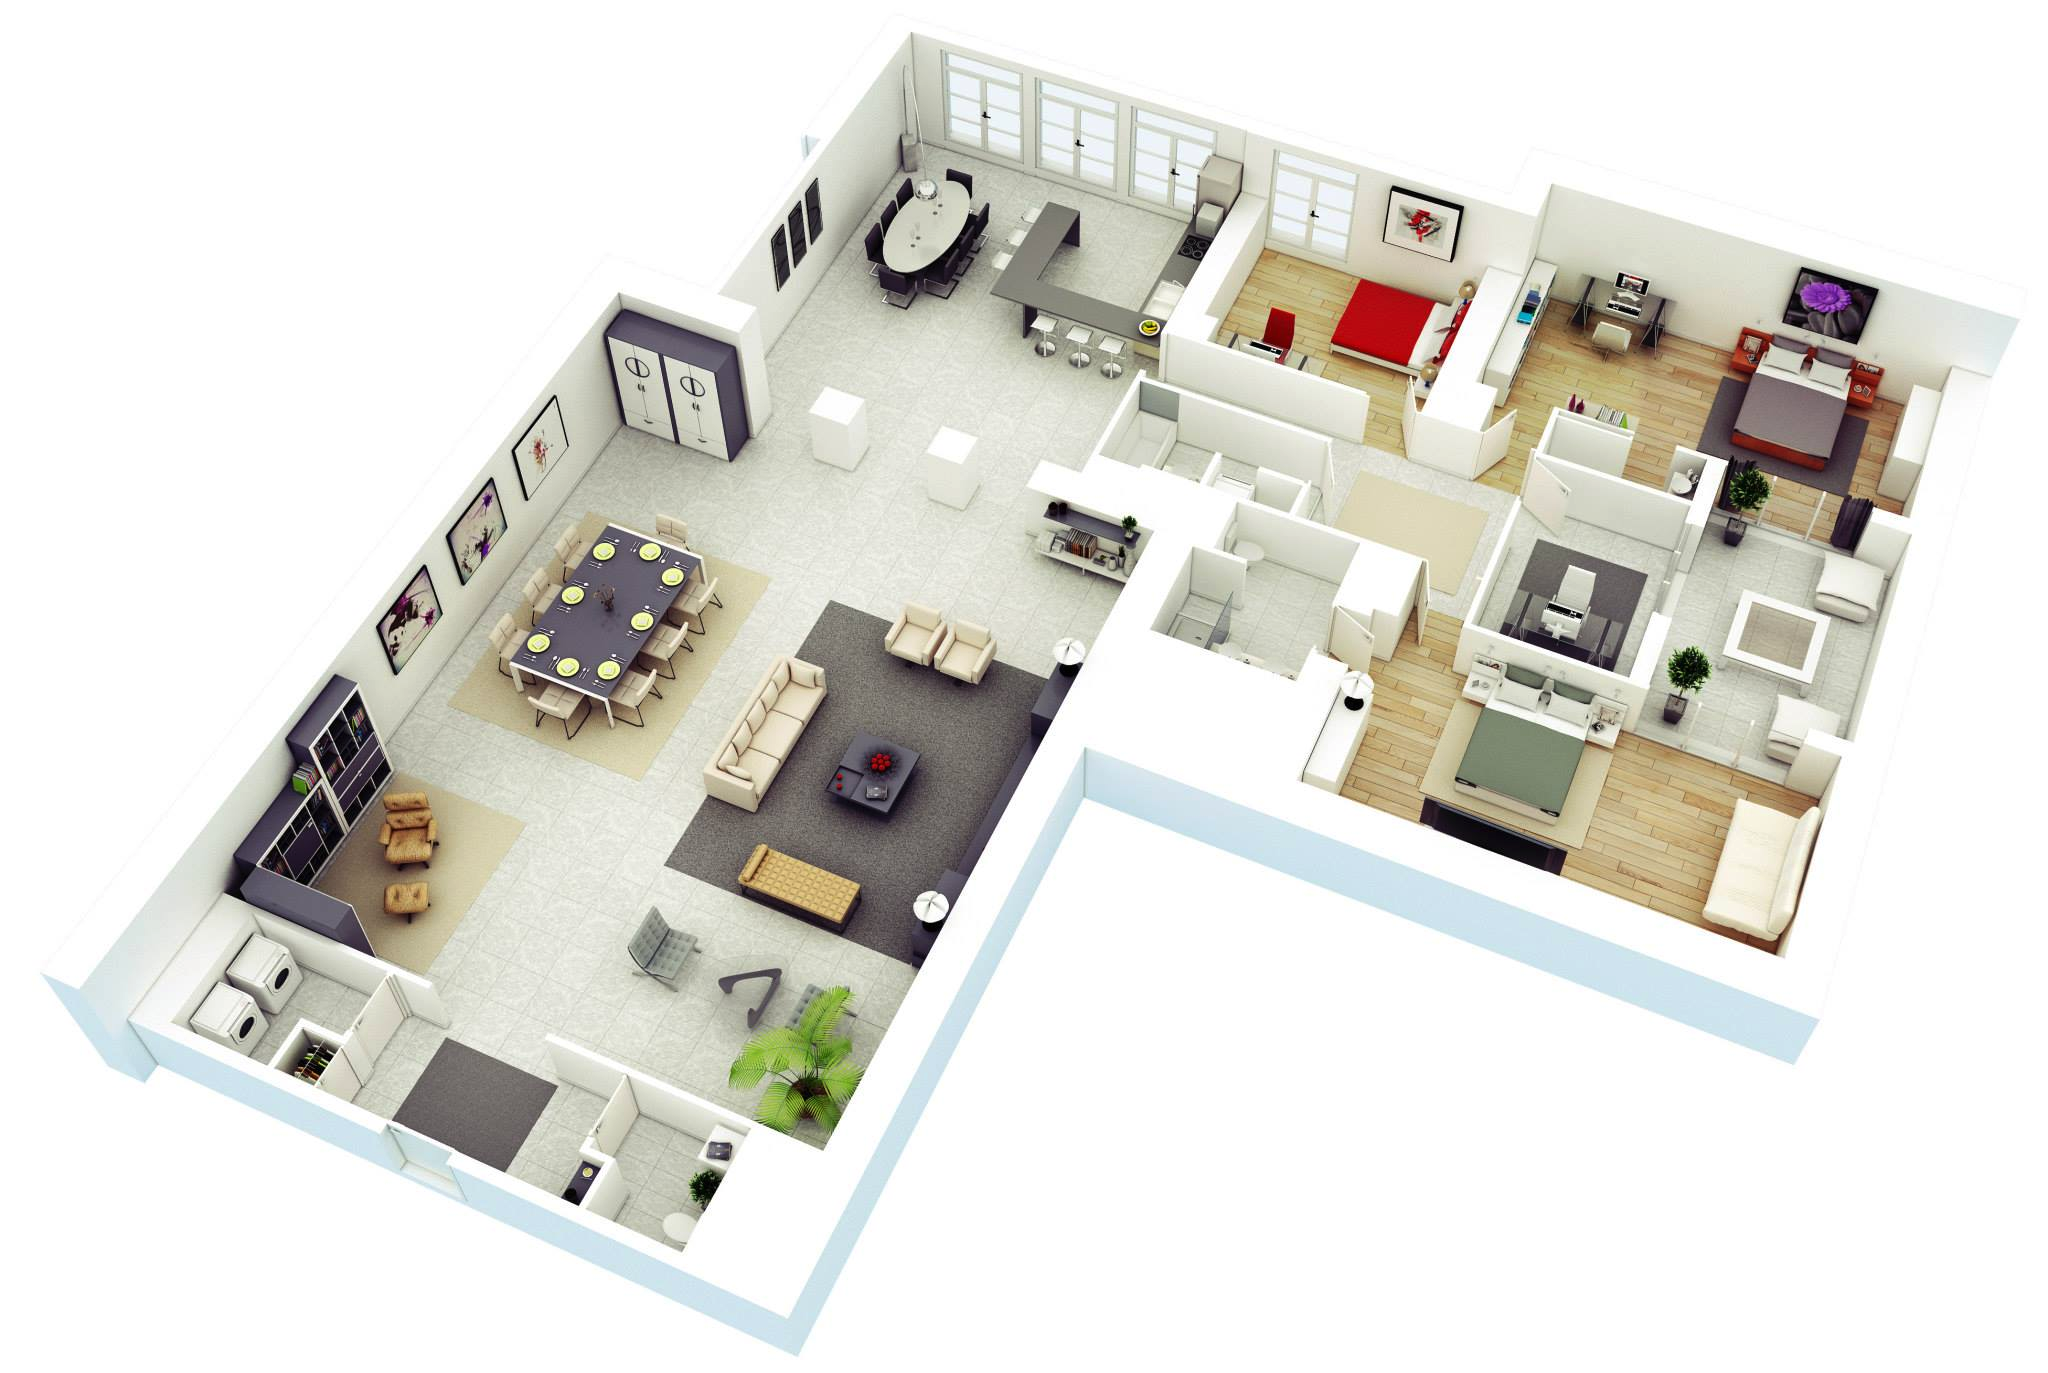 What Should a Floor Plan Include?